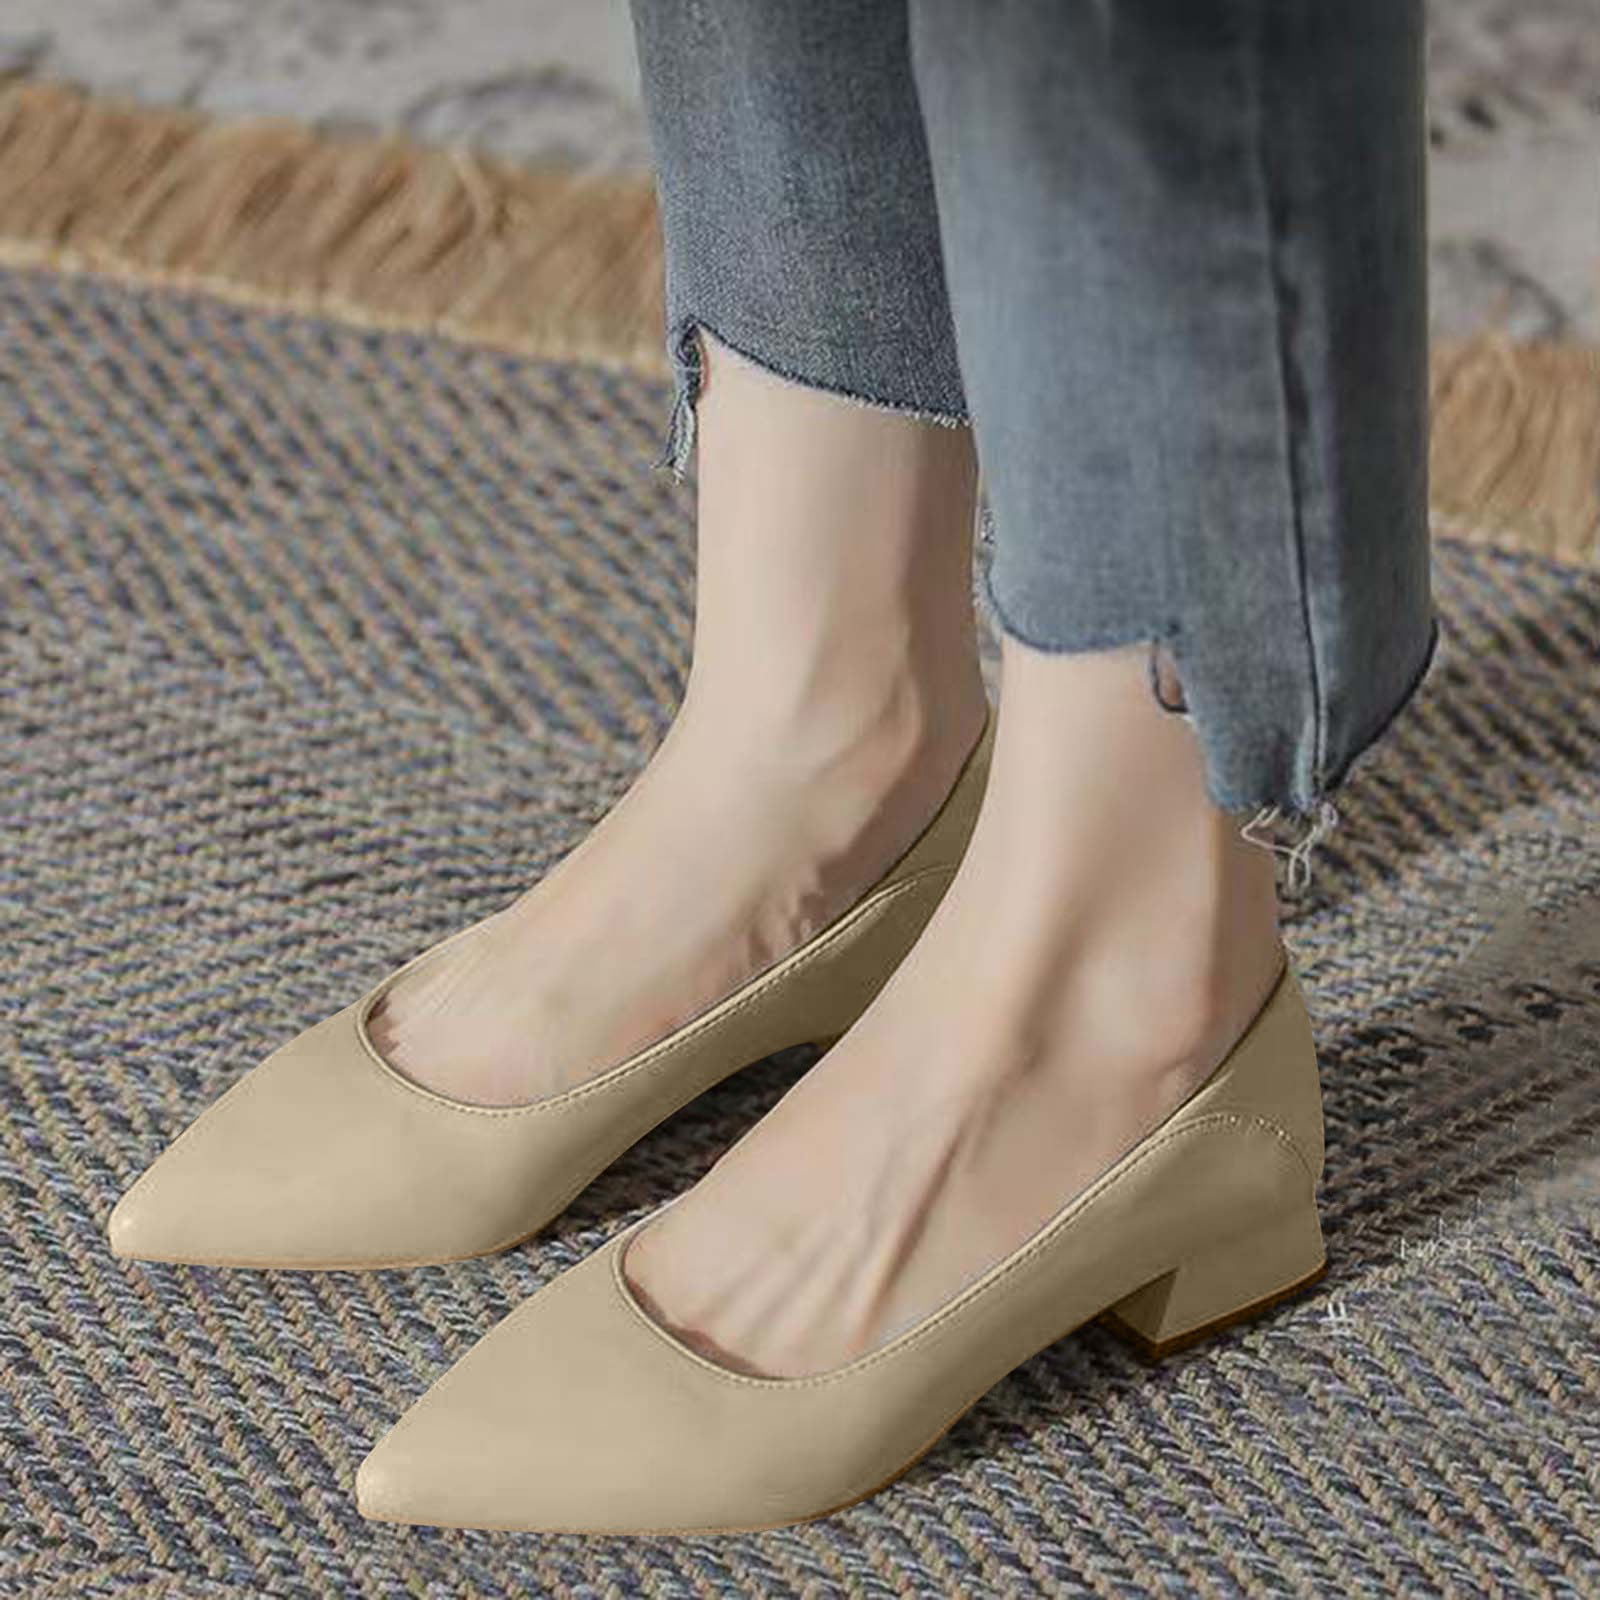 Boussac Elegant Bowtie Slingback High Heel Women Pumps Sexy Pointed Toe  High Heels Ladies Shoes Suede Thin Heel Party Shoes - AliExpress